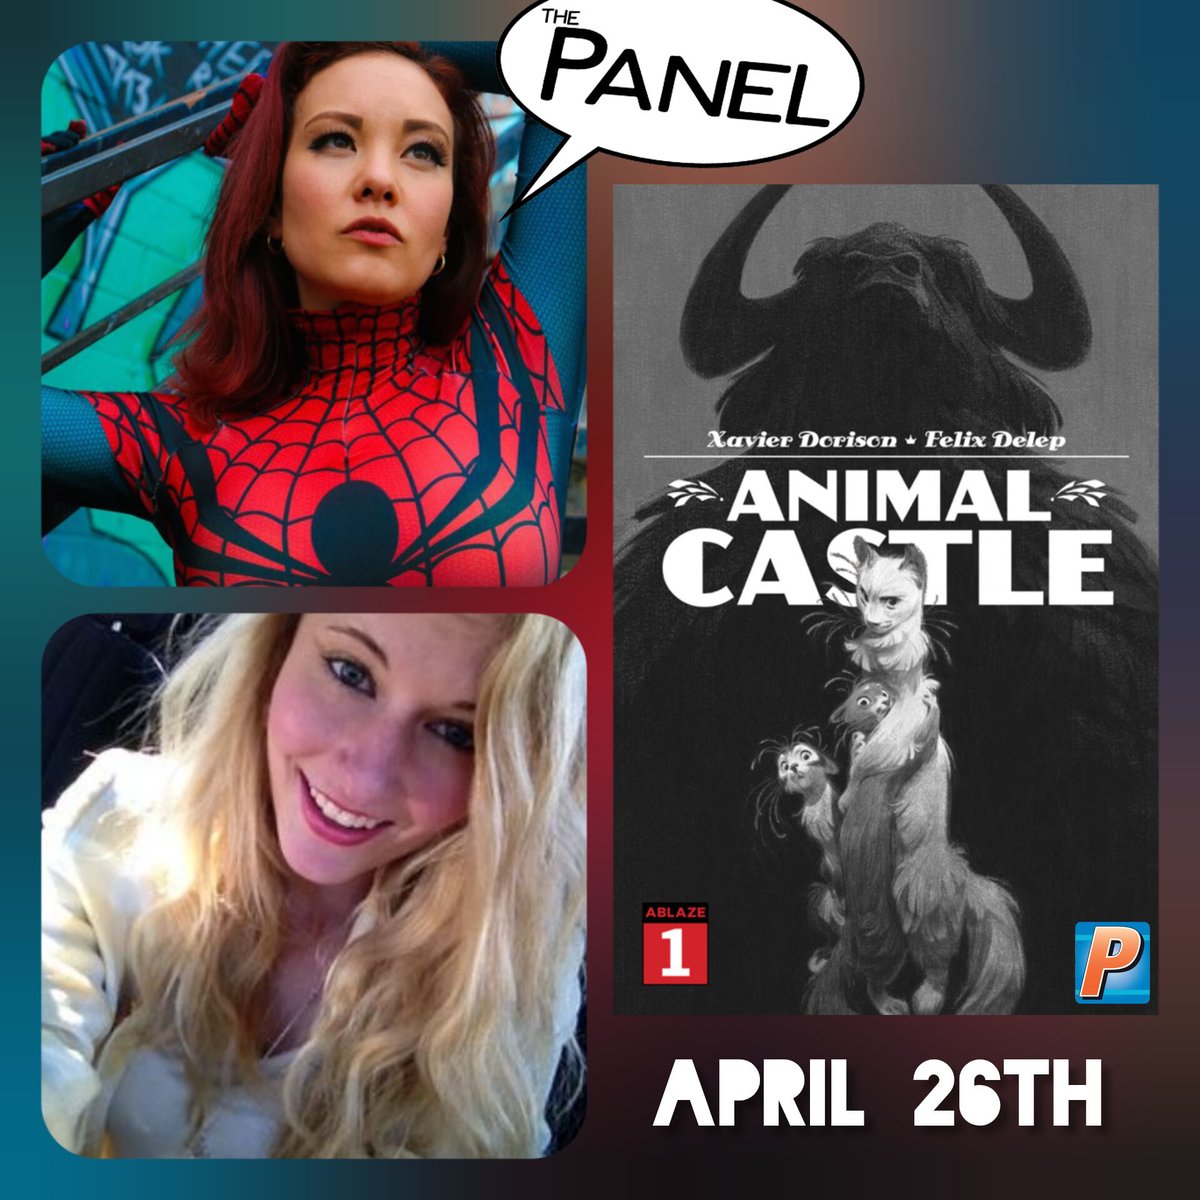 'On the Farm all animals were equal. In the Castle some are more equal than others.' This Friday! Join @AniMiaOfficial and the Duchess of @FreeComicBook as they discuss ANIMAL CASTLE from @AblazePub. A spiritual sequel to Orwell's ANIMAL FARM. Stay tuned for further details!